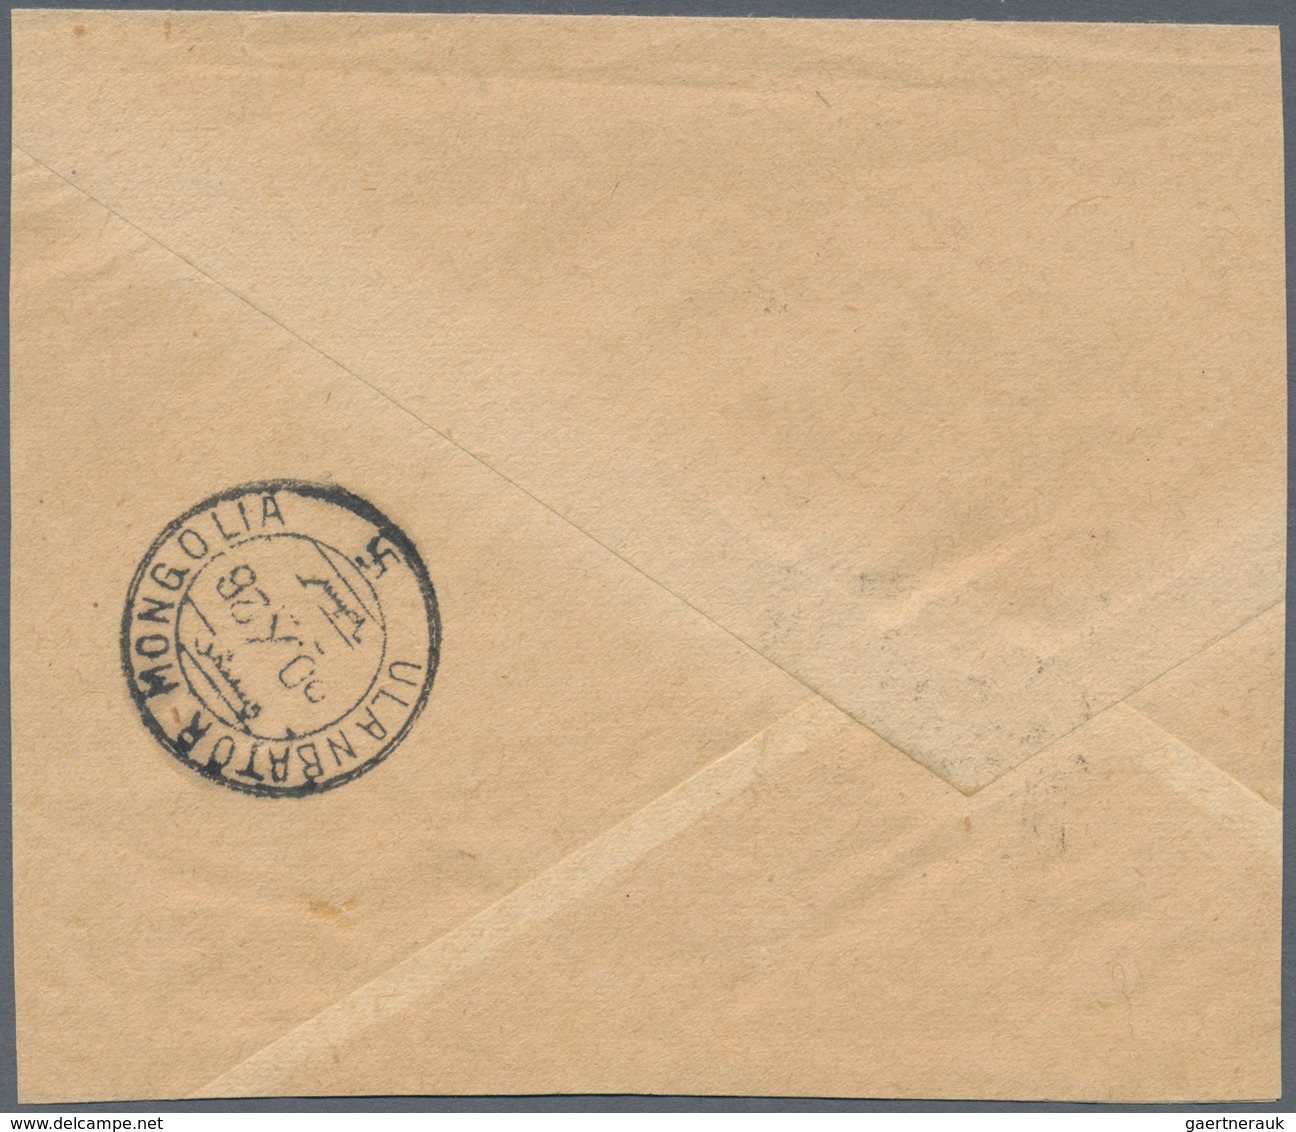 Mongolei: 1926 Unoverprinted Fiscal 10c. Green Horiz. Strip Of Four Used On Part Envelope (reduced A - Mongolië